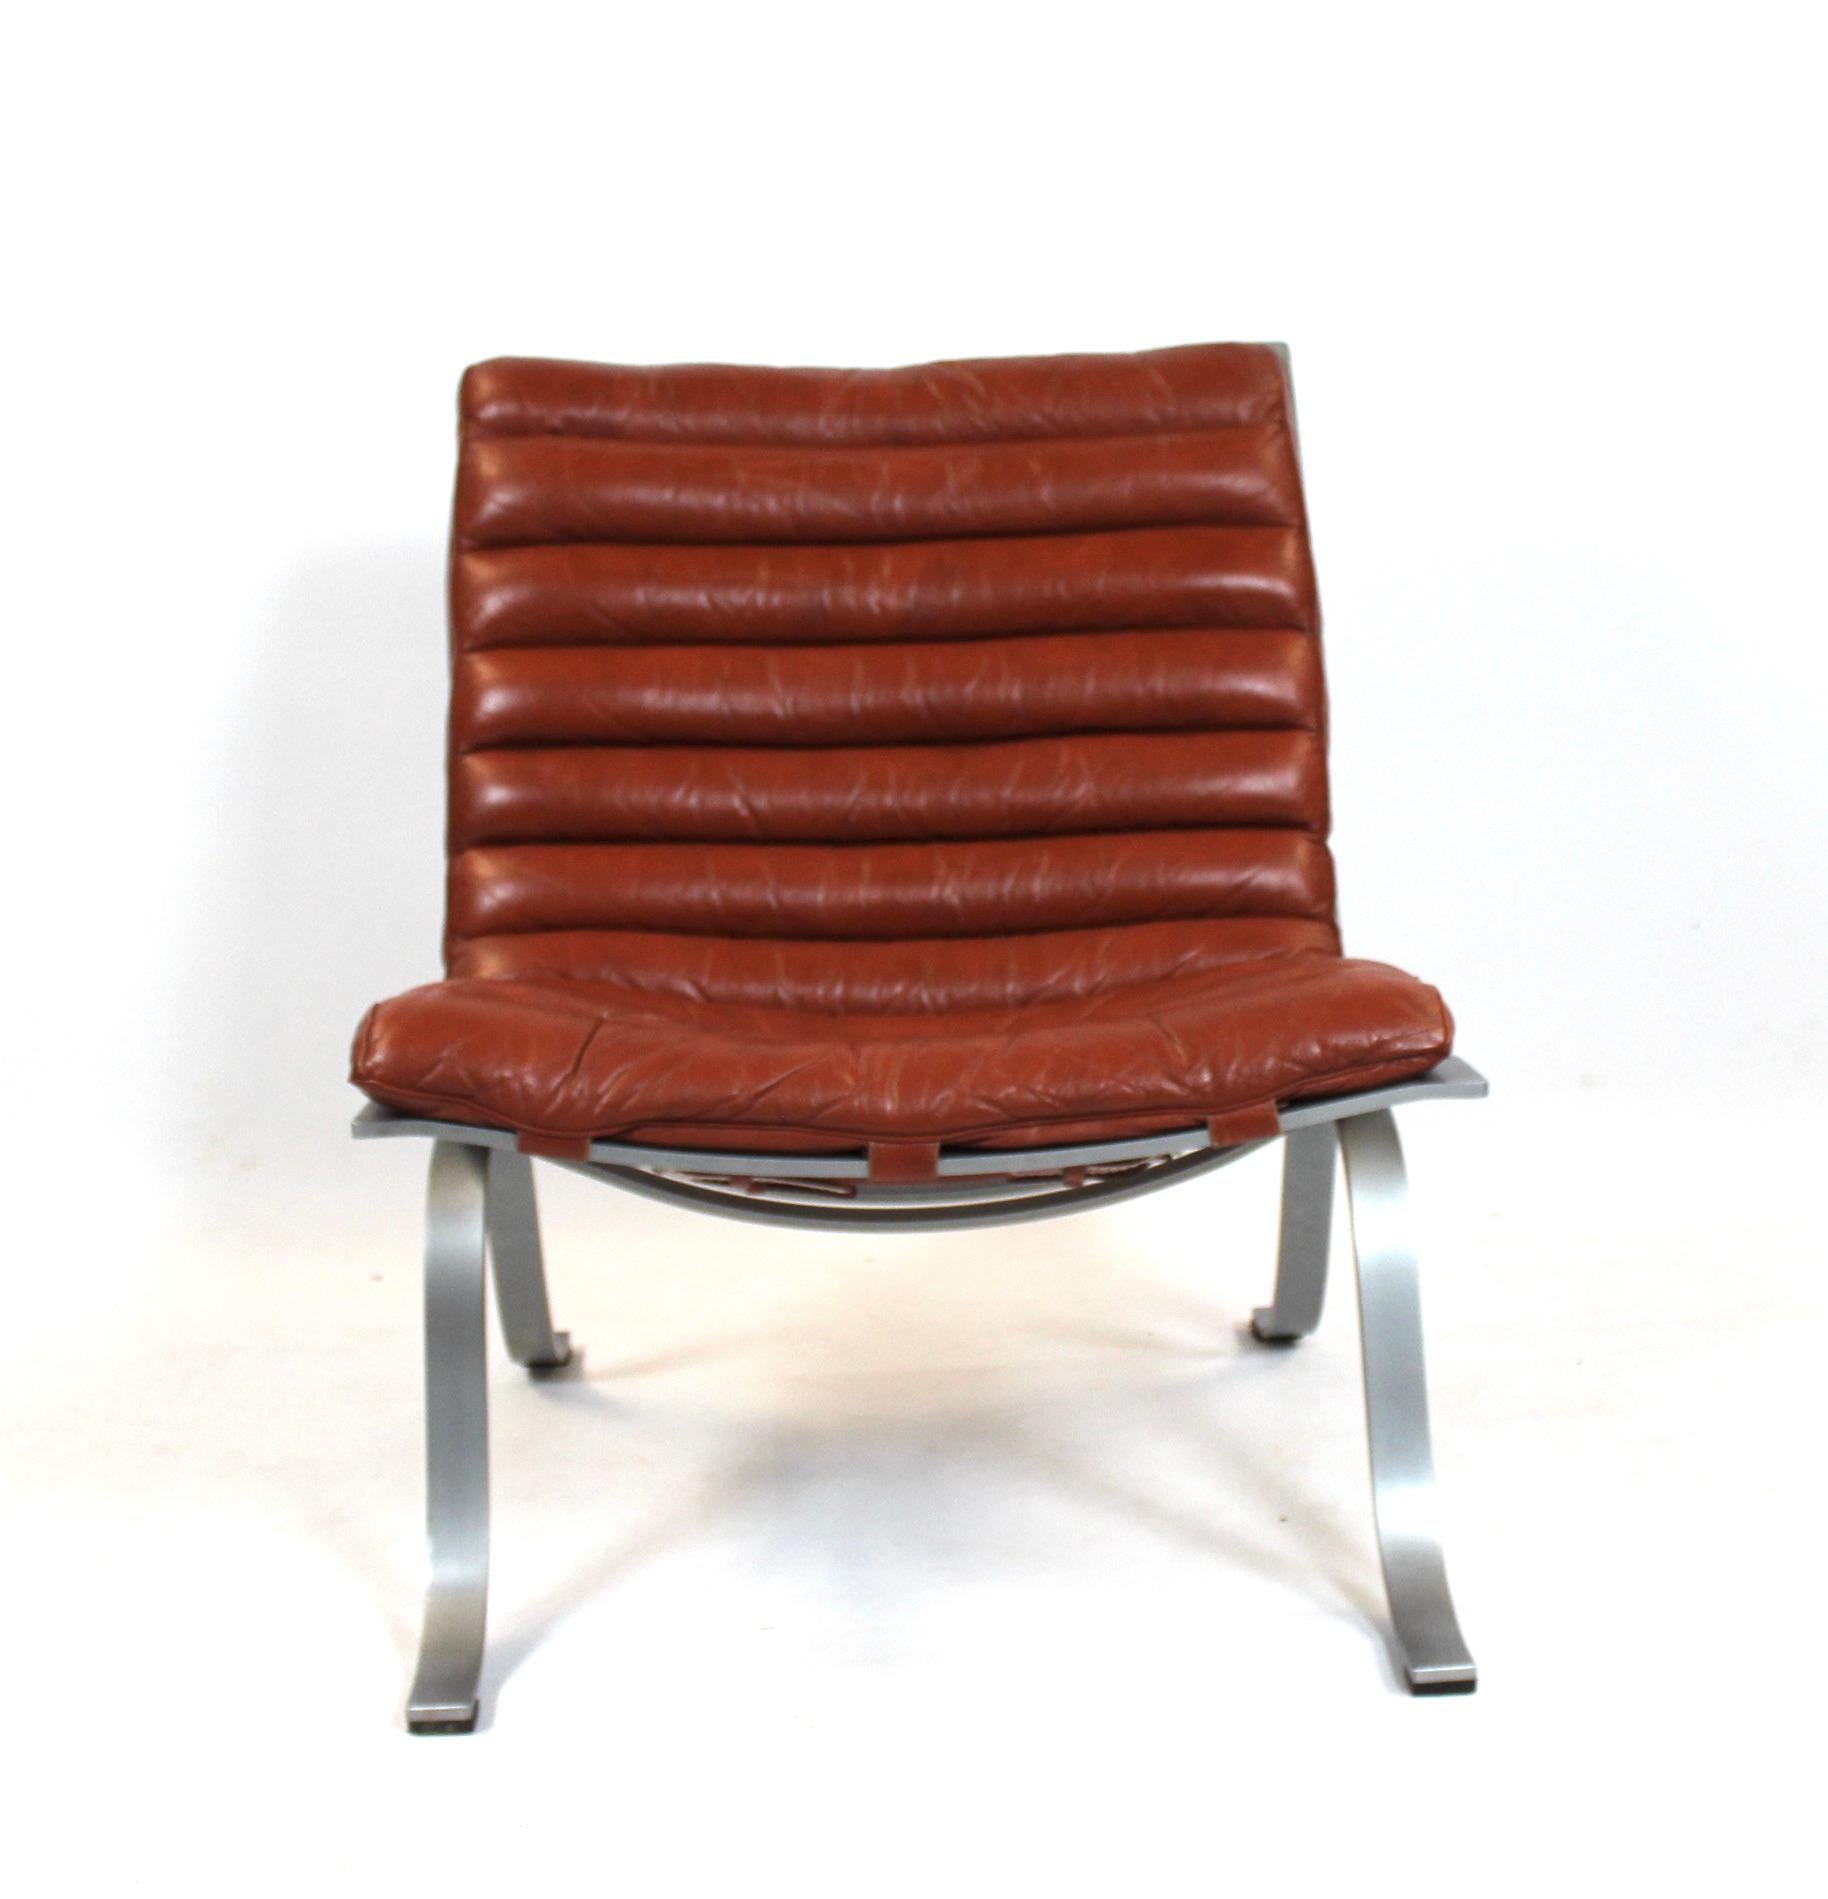 Easy chair, model Ariet, of red leather and steel frame designed by Arne Norell and manufactured by Norell Furniture AB. The chair is in great vintage conditon.
  